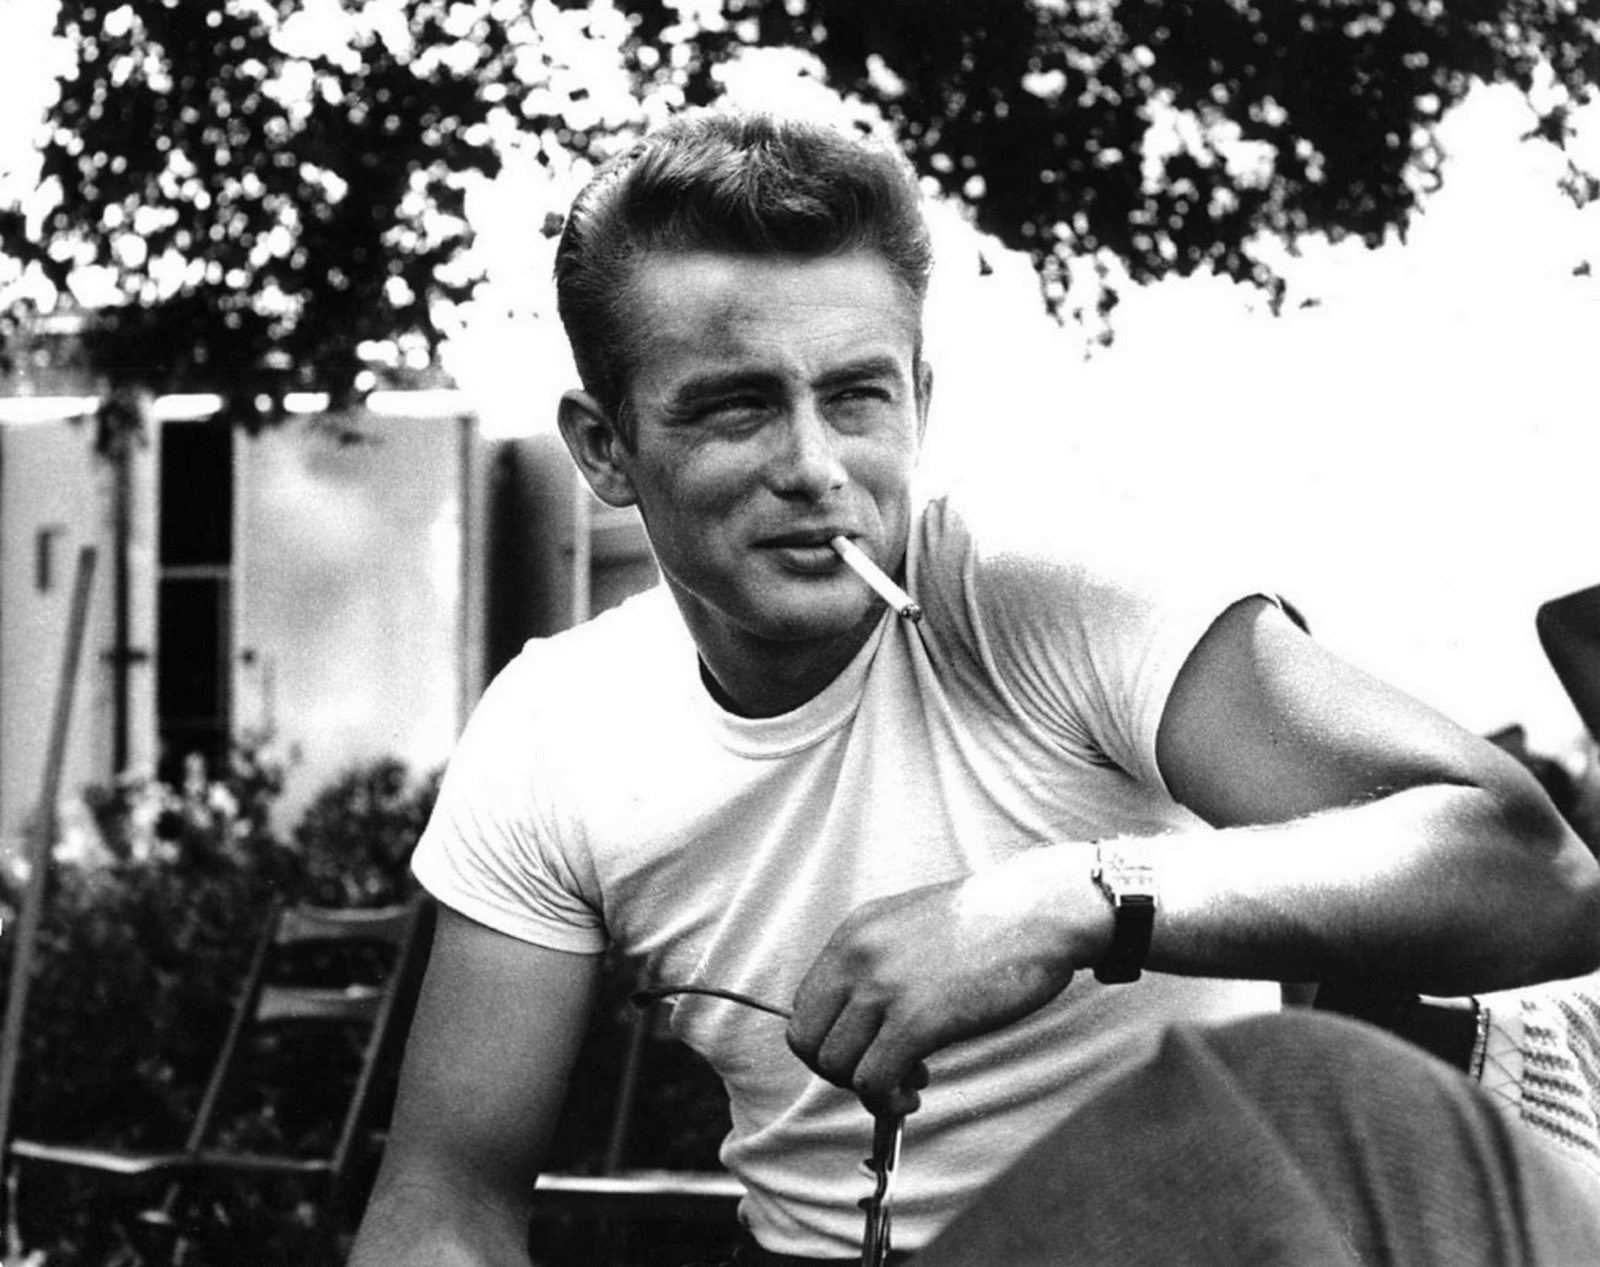 James Dean - Rebel Without a Cause